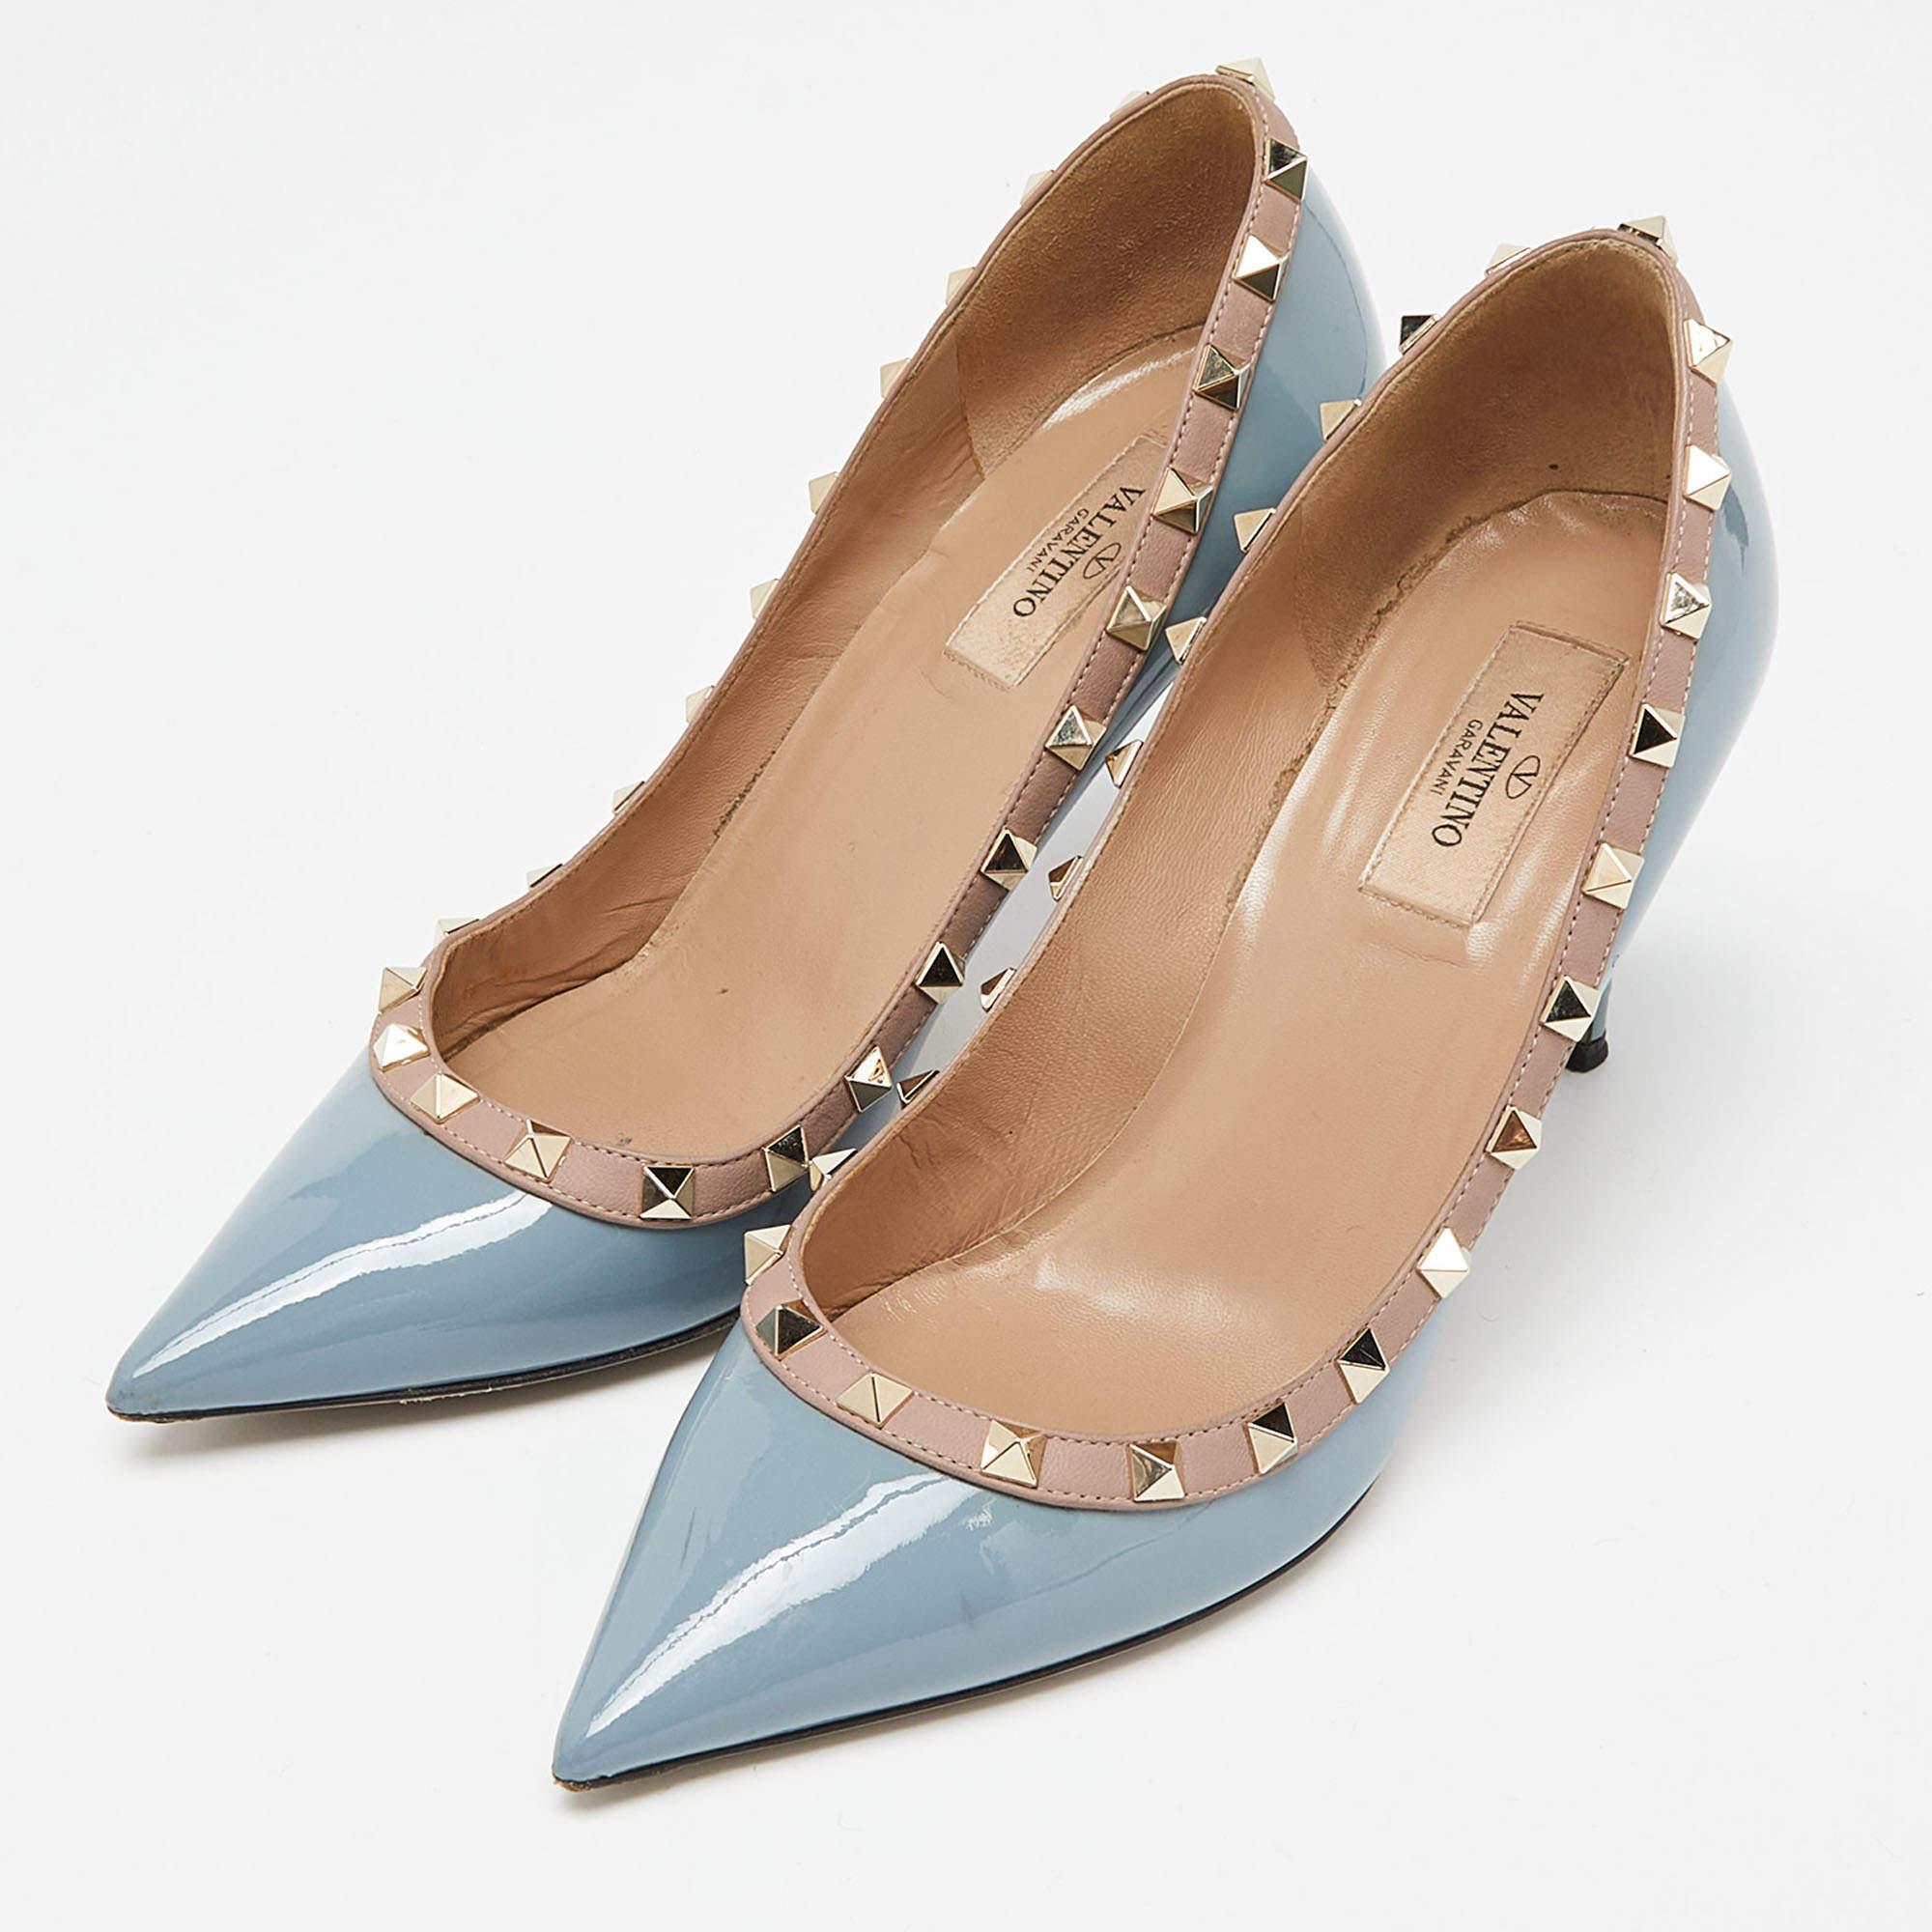 The elegantly placed Rockstuds on the outline of this pair of Valentino pumps make it captivating. Crafted from leather, it is perfectly raised on 11cm heels and cut into a pointed-toe silhouette.

